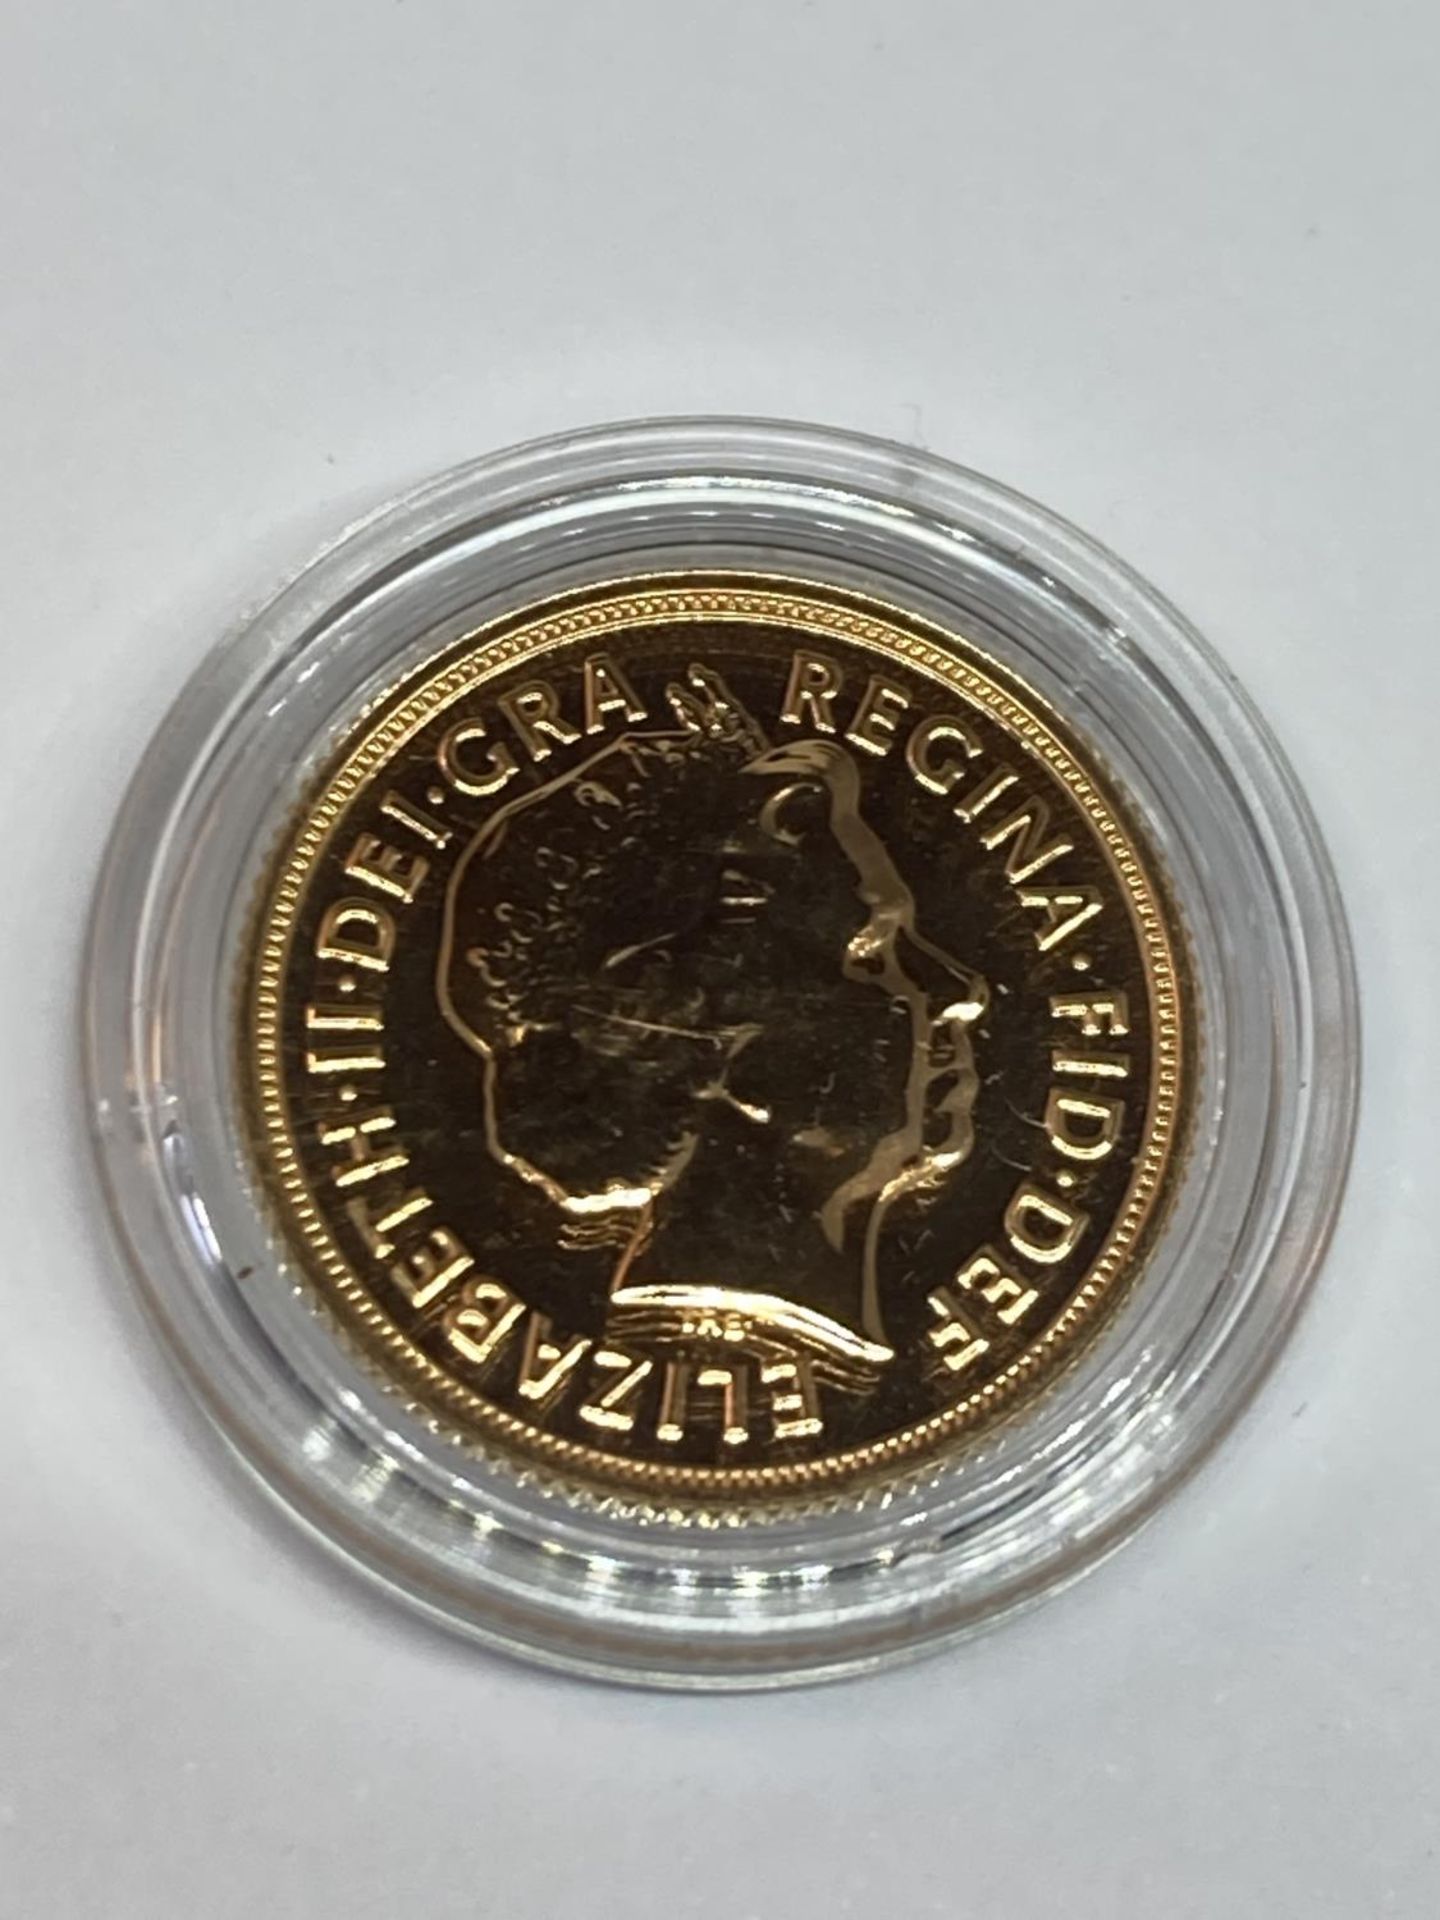 A 2014 GOLD SOVEREIGN - Image 2 of 2